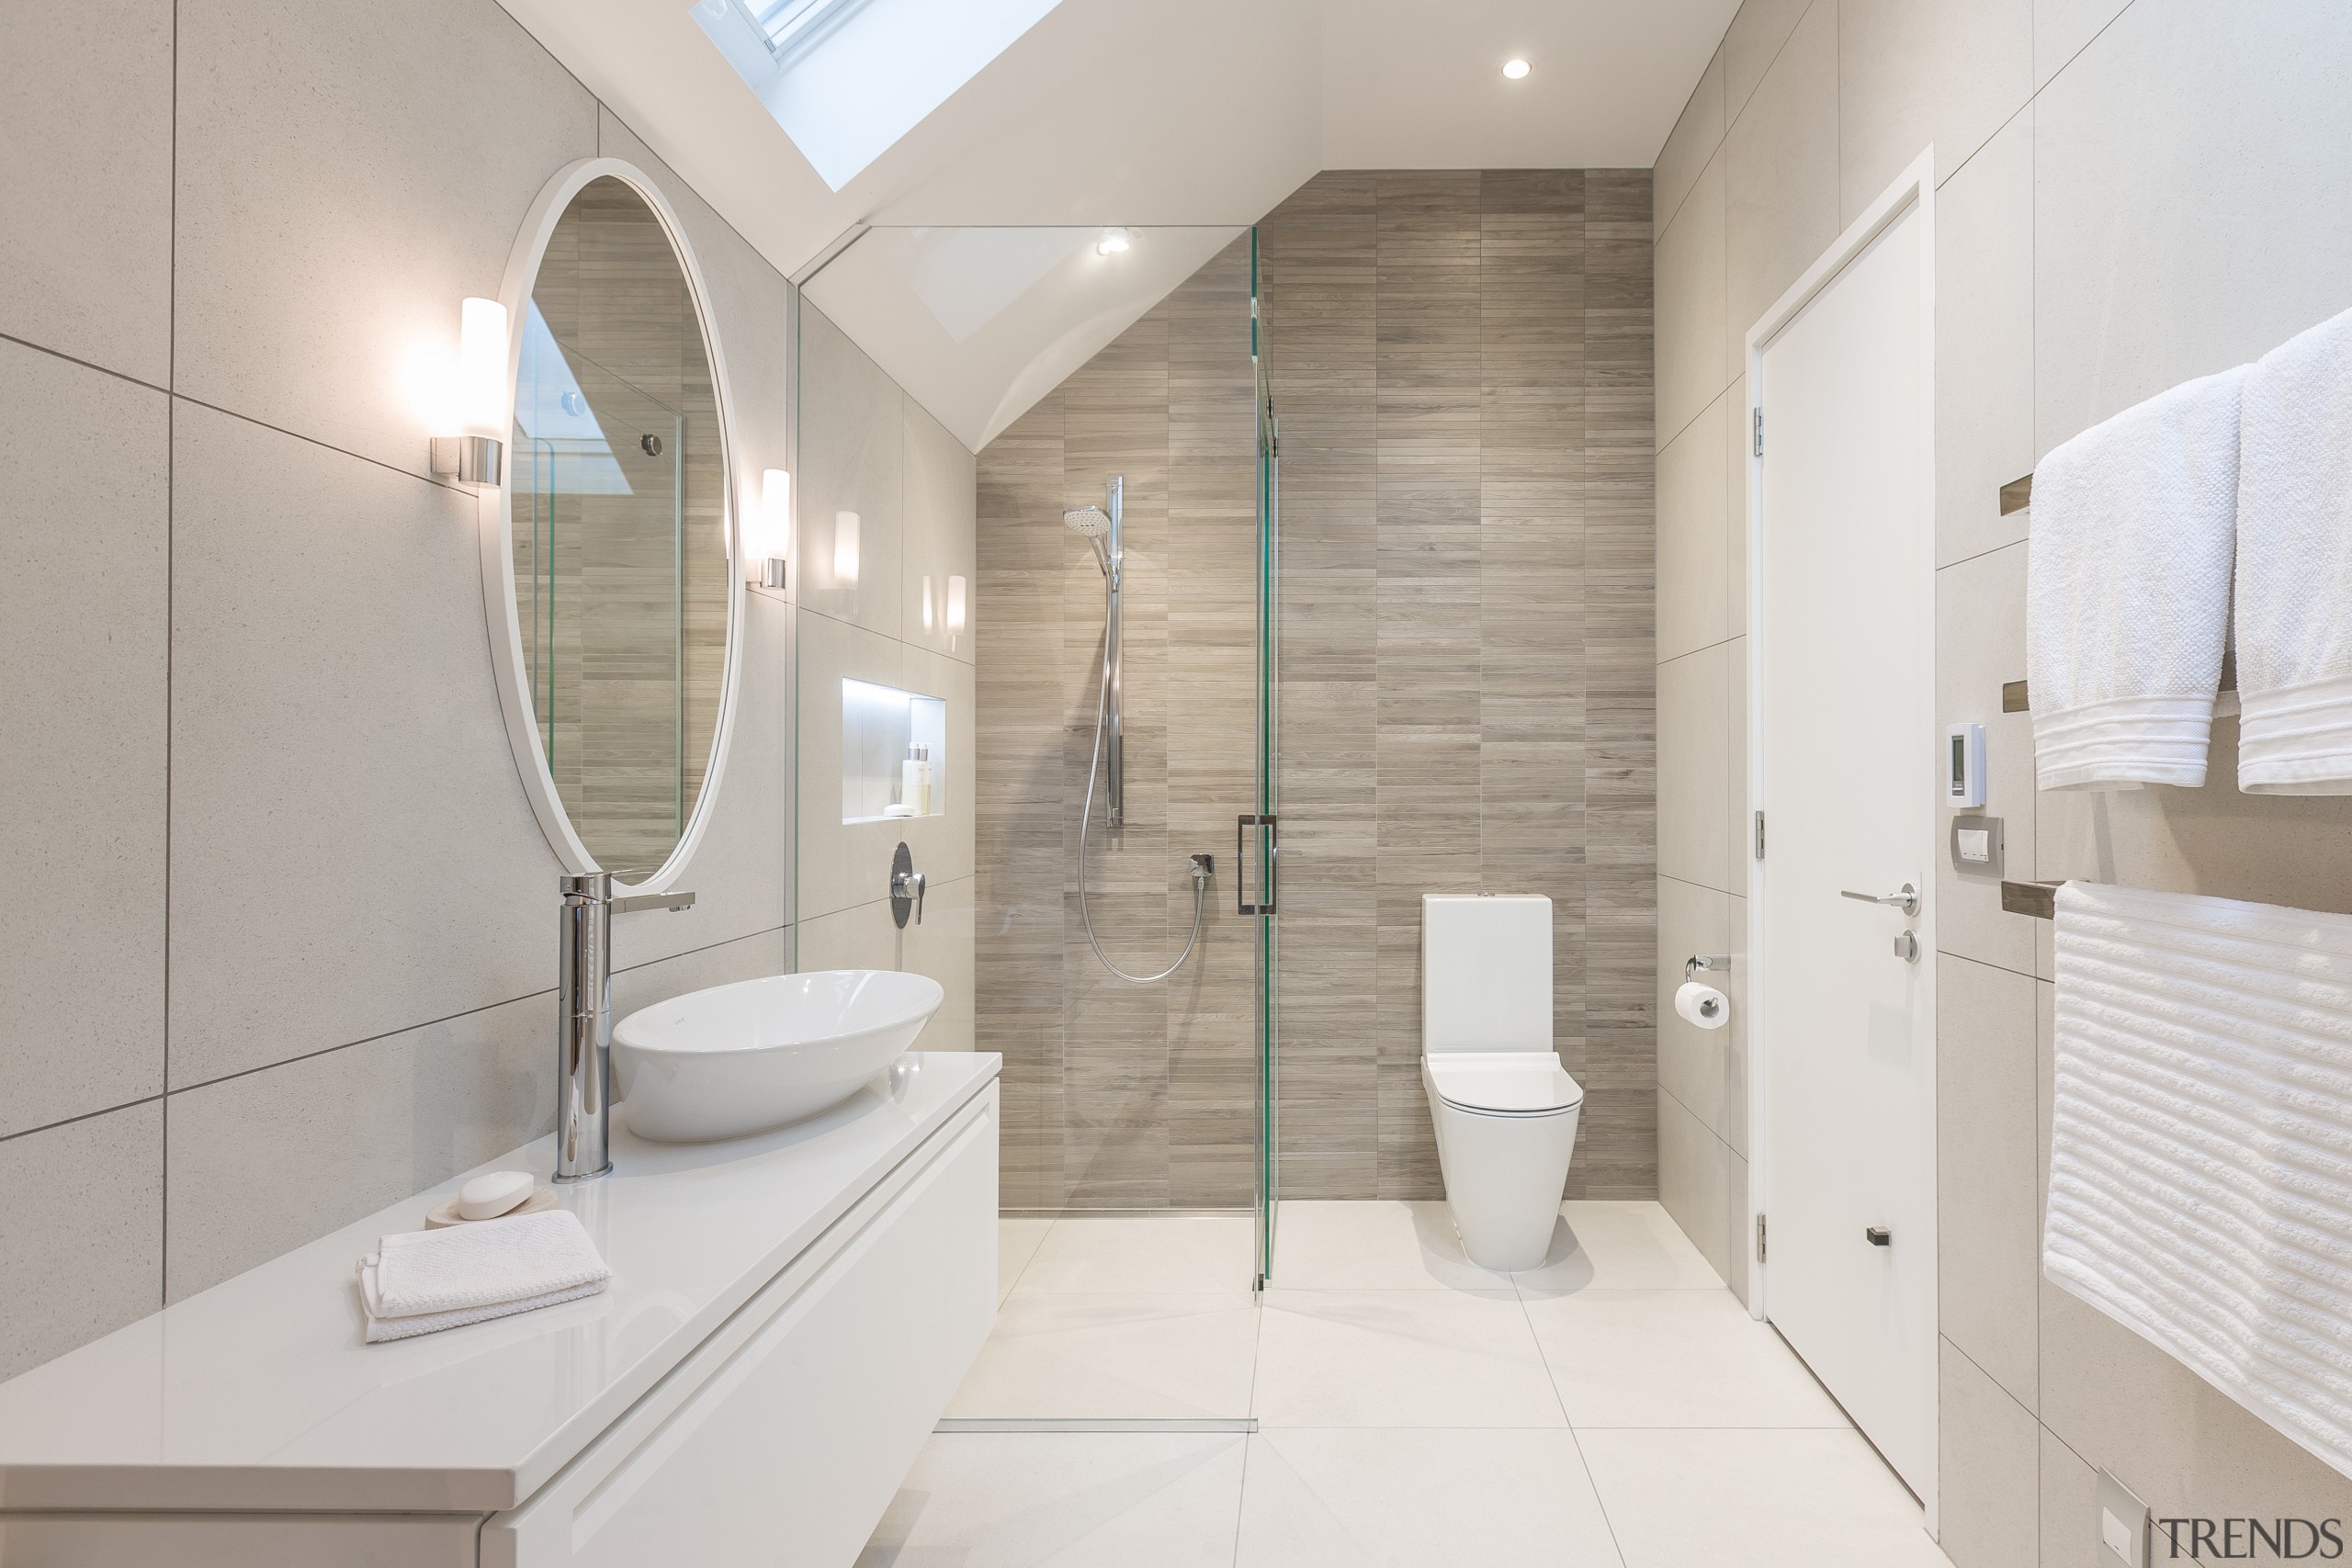 A glass showerstall maximises the sense of space architecture, bathroom, home, interior design, product design, property, real estate, room, gray